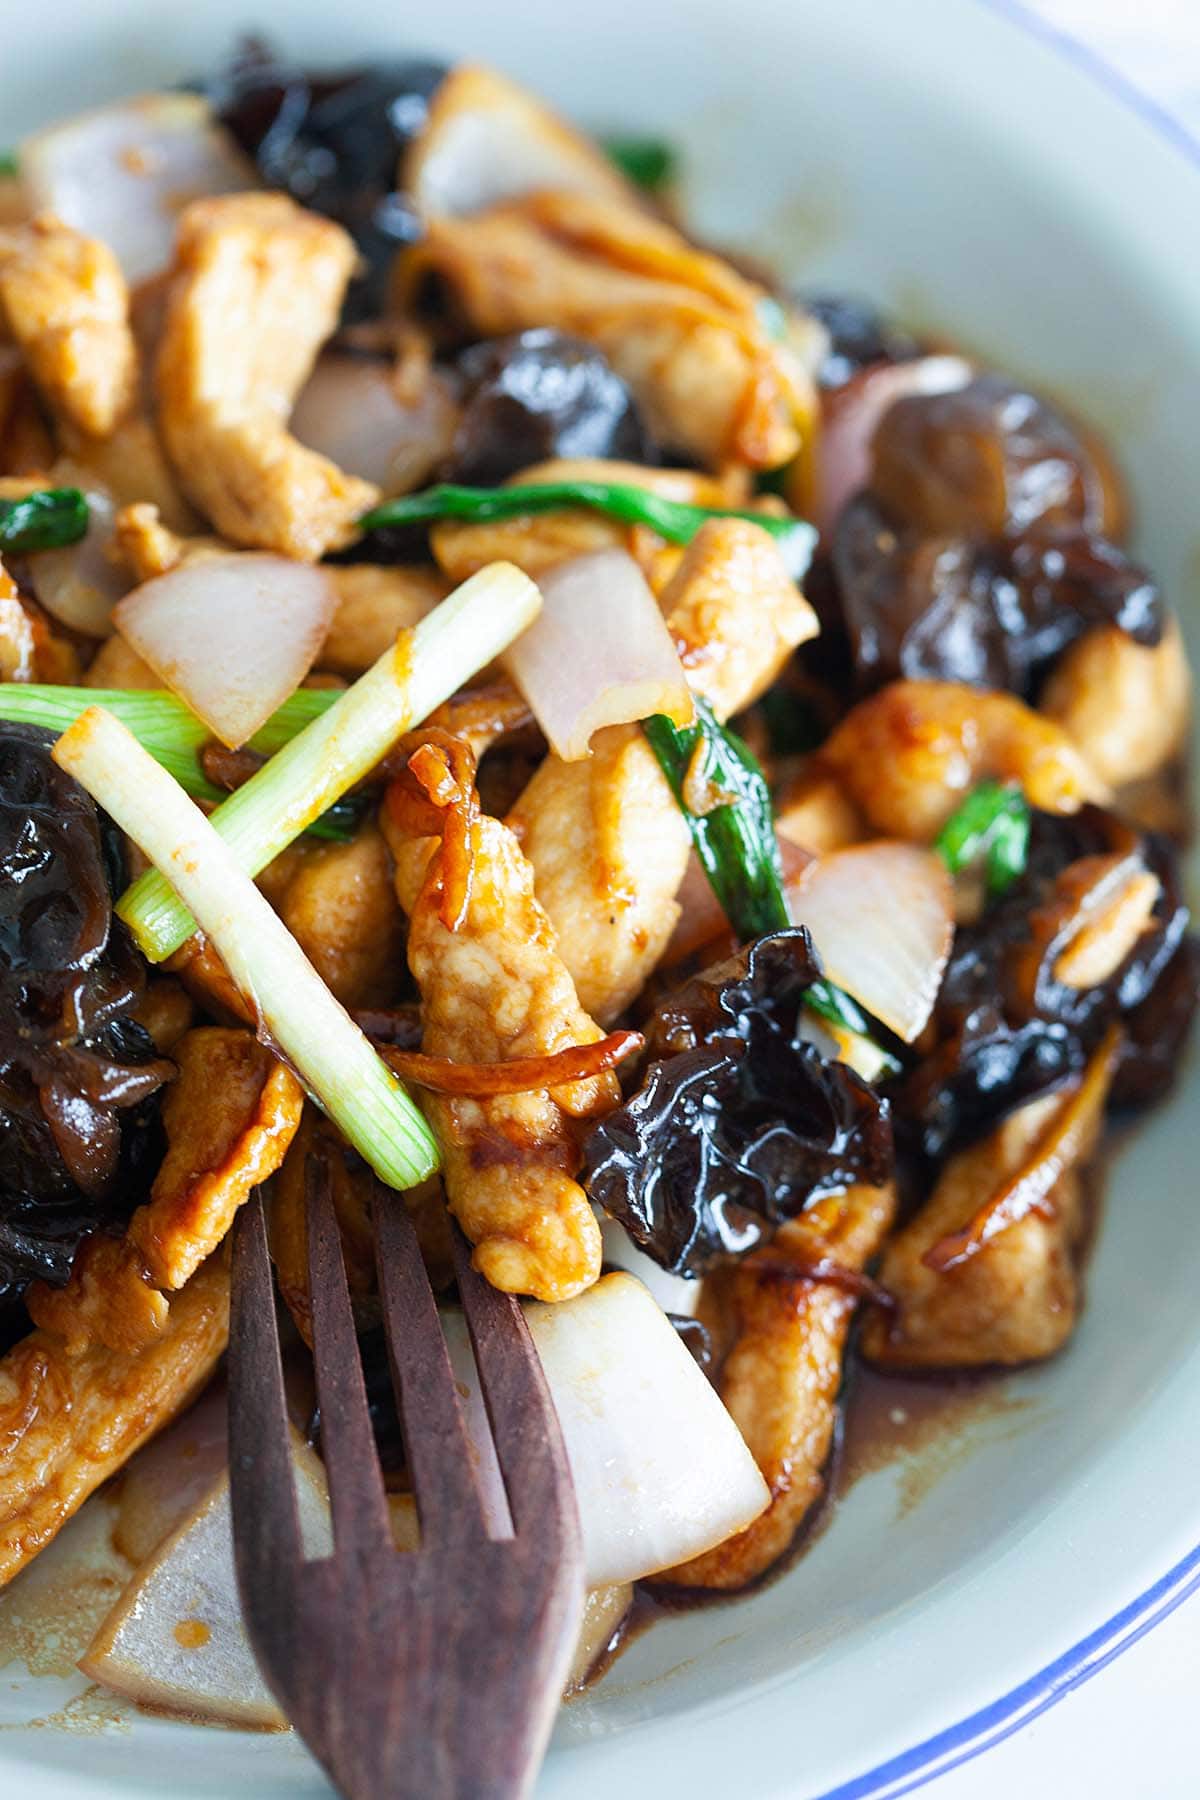 Stir fry chicken with black fungus and ginger.